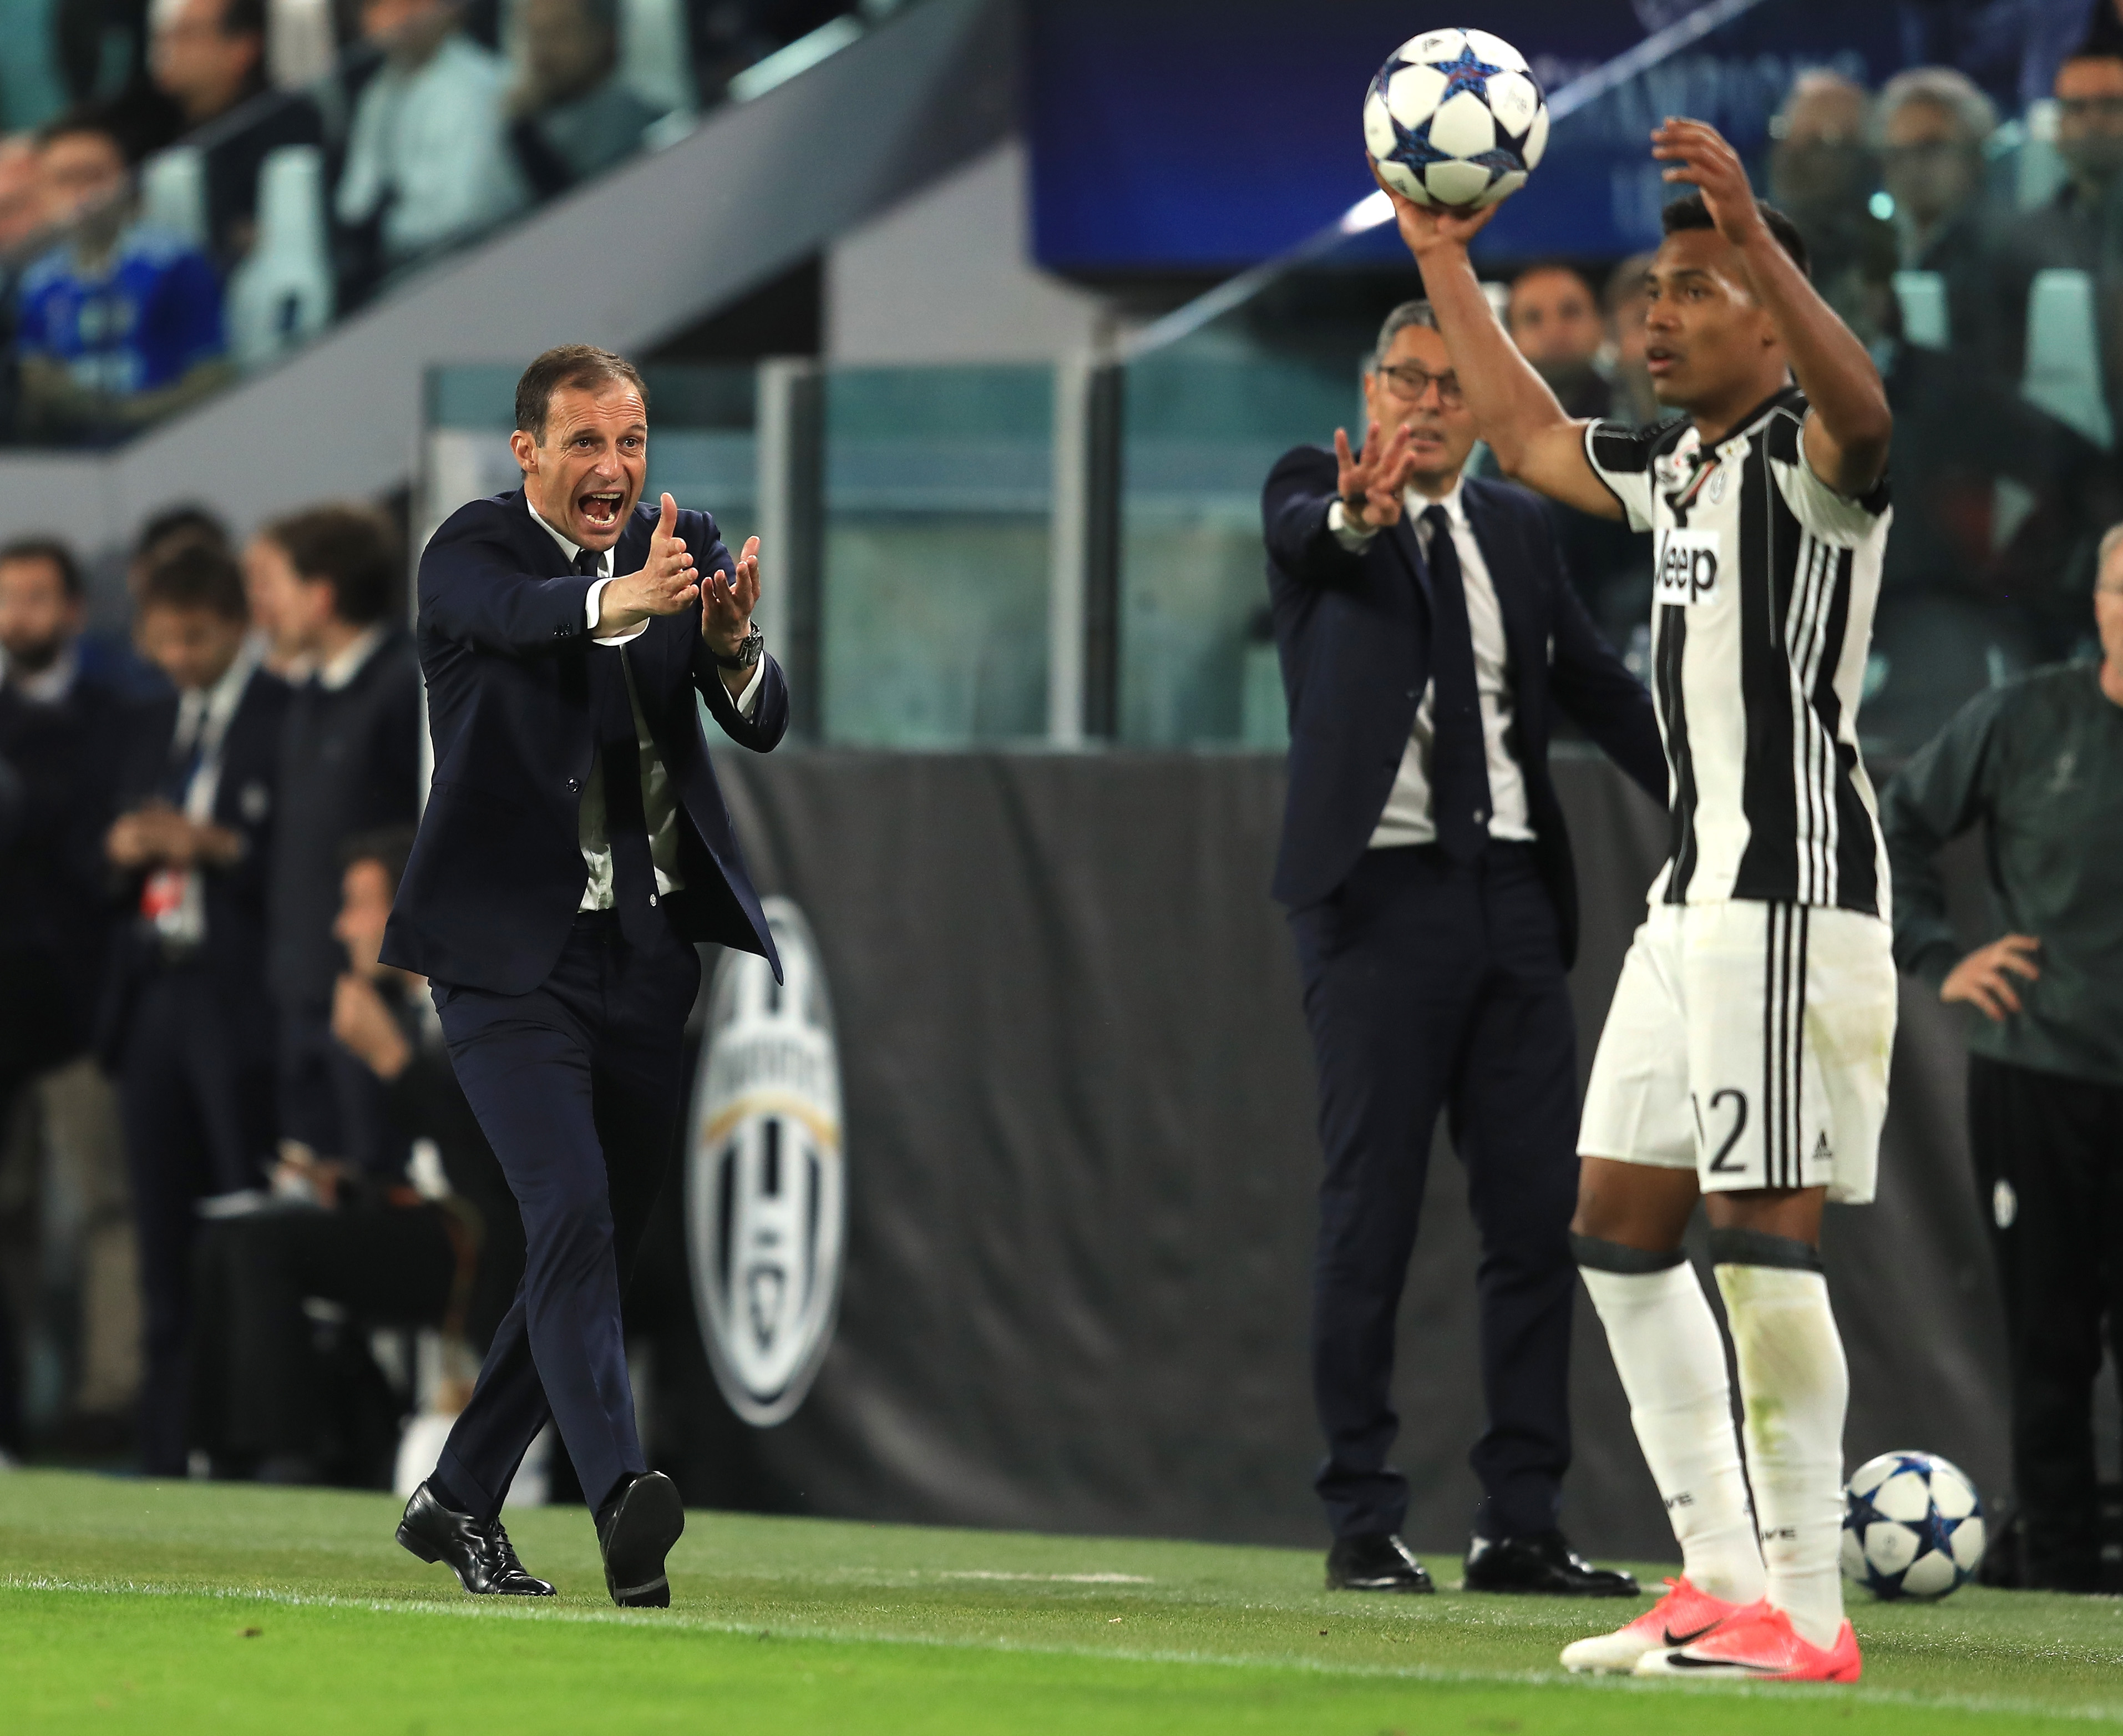 TURIN, ITALY - MAY 09:  Massimiliano Allegri, Manager of Juventus gestures towards Alex Sandro of Juventus during the UEFA Champions League Semi Final second leg match between Juventus and AS Monaco at Juventus Stadium on May 9, 2017 in Turin, Italy.  (Photo by Richard Heathcote/Getty Images)